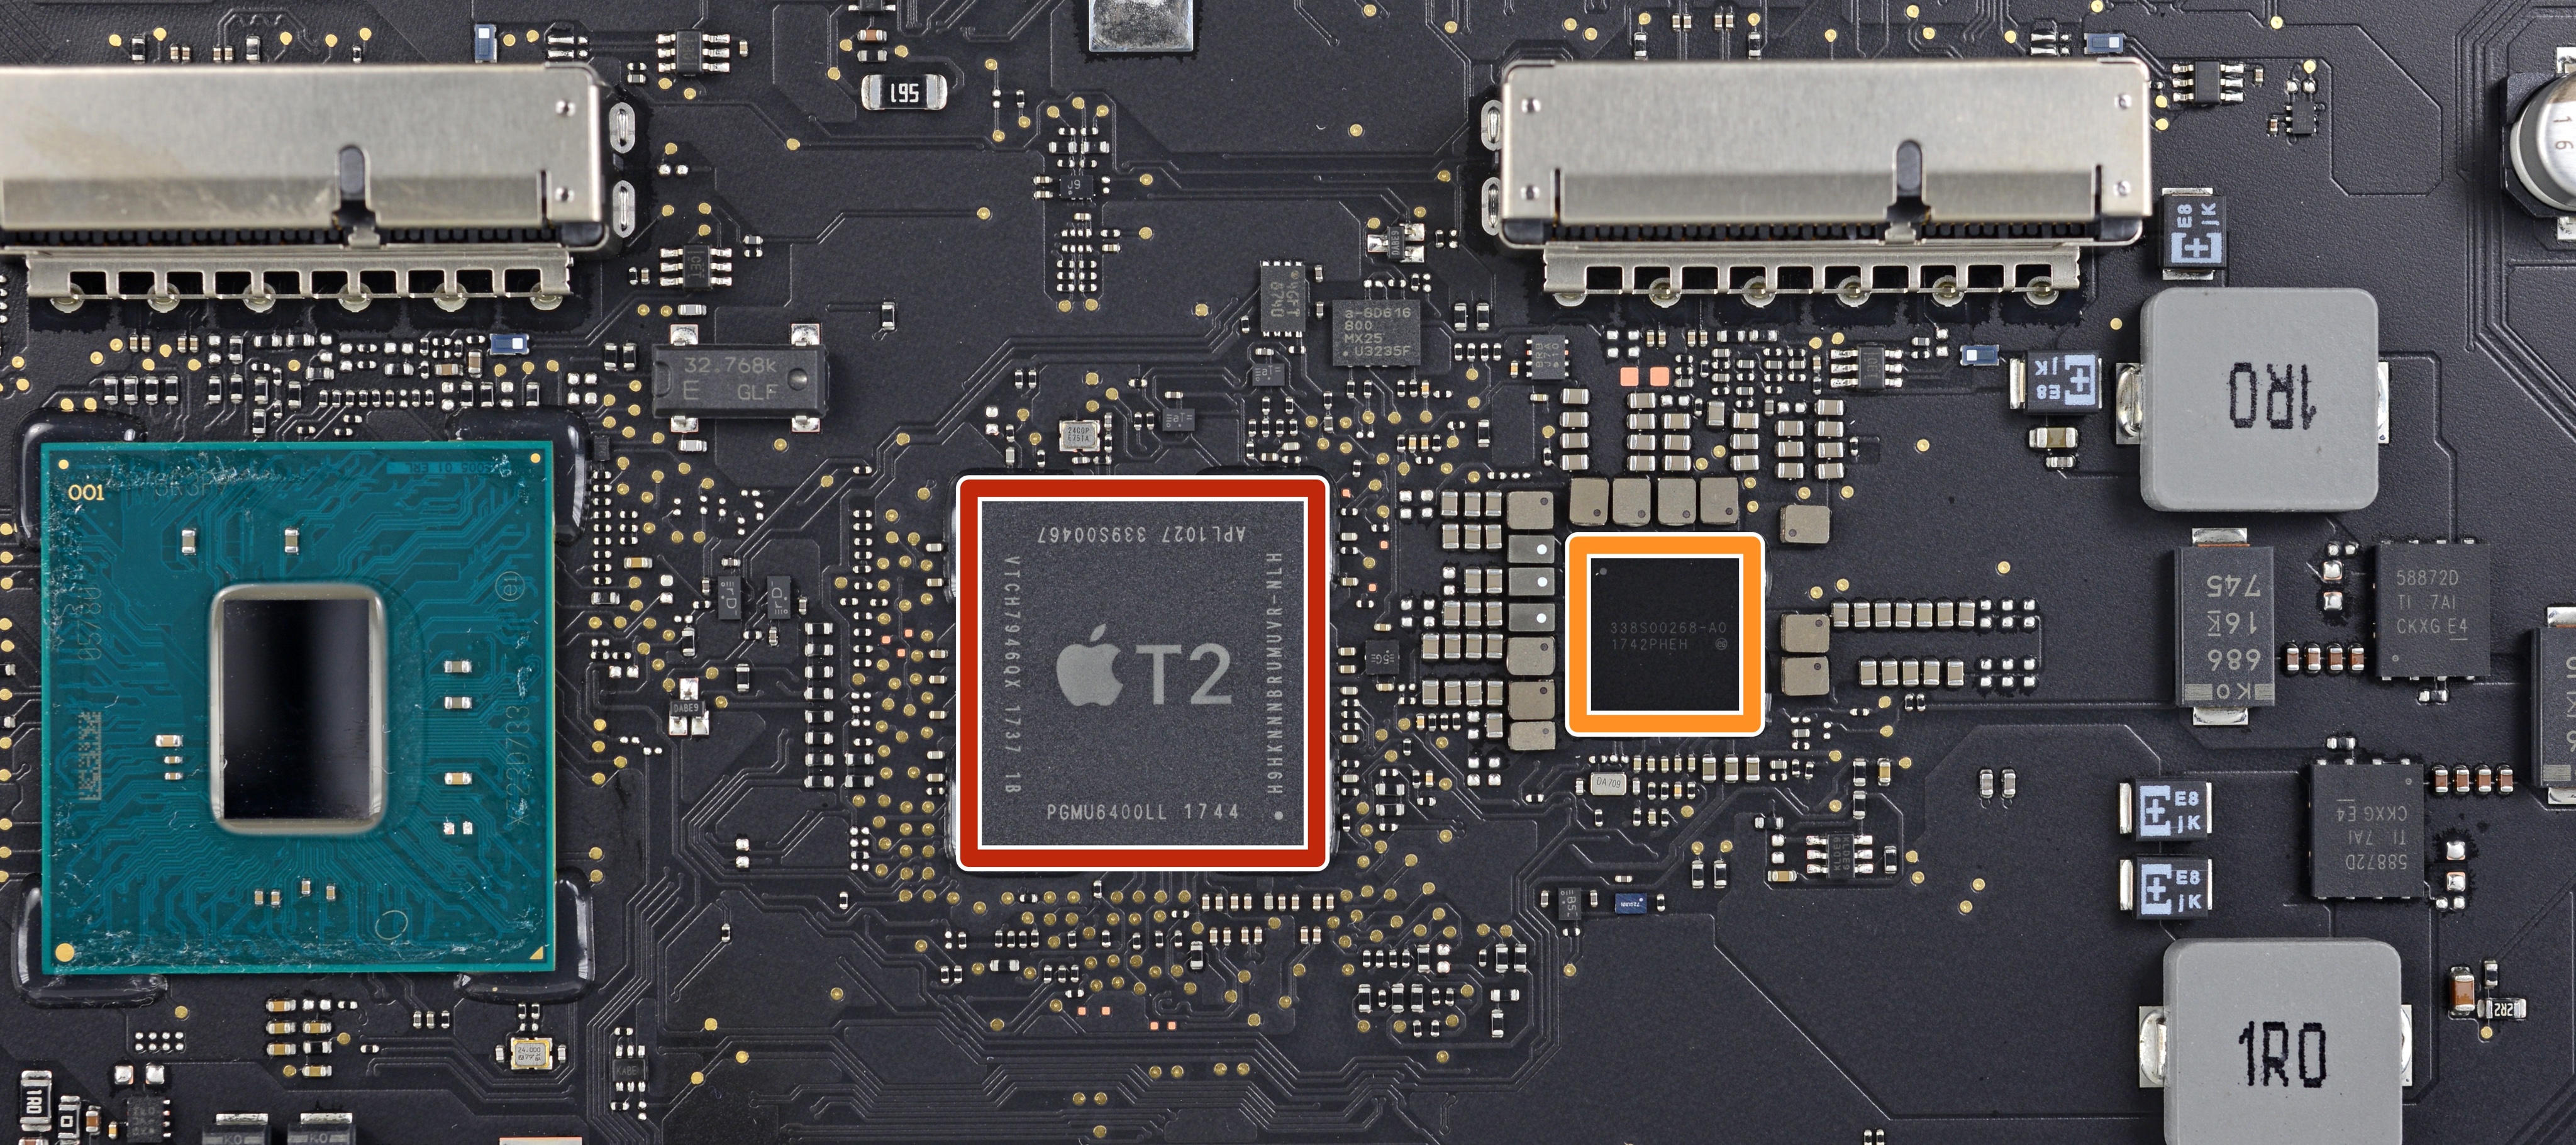 The Apple T2 security chip on the iMac Pro motherboard, courtesy of iFixit